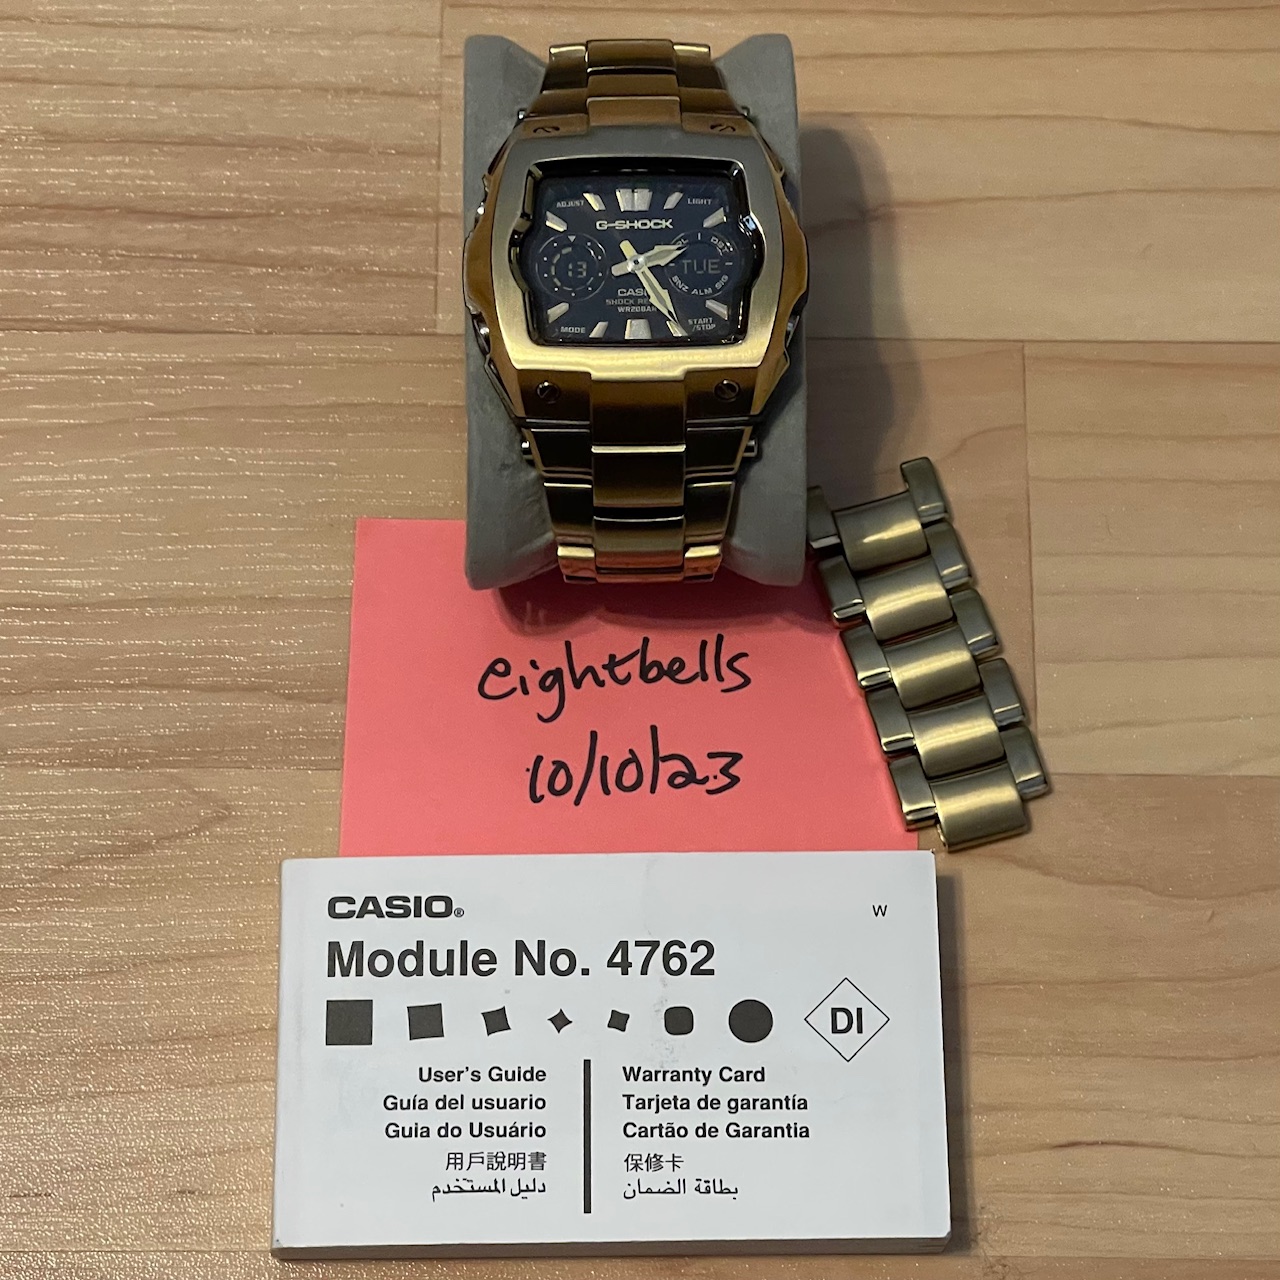 WTS] Casio G-Shock G-011BD-9A “The Cube” Gold & Black Steel Analog 